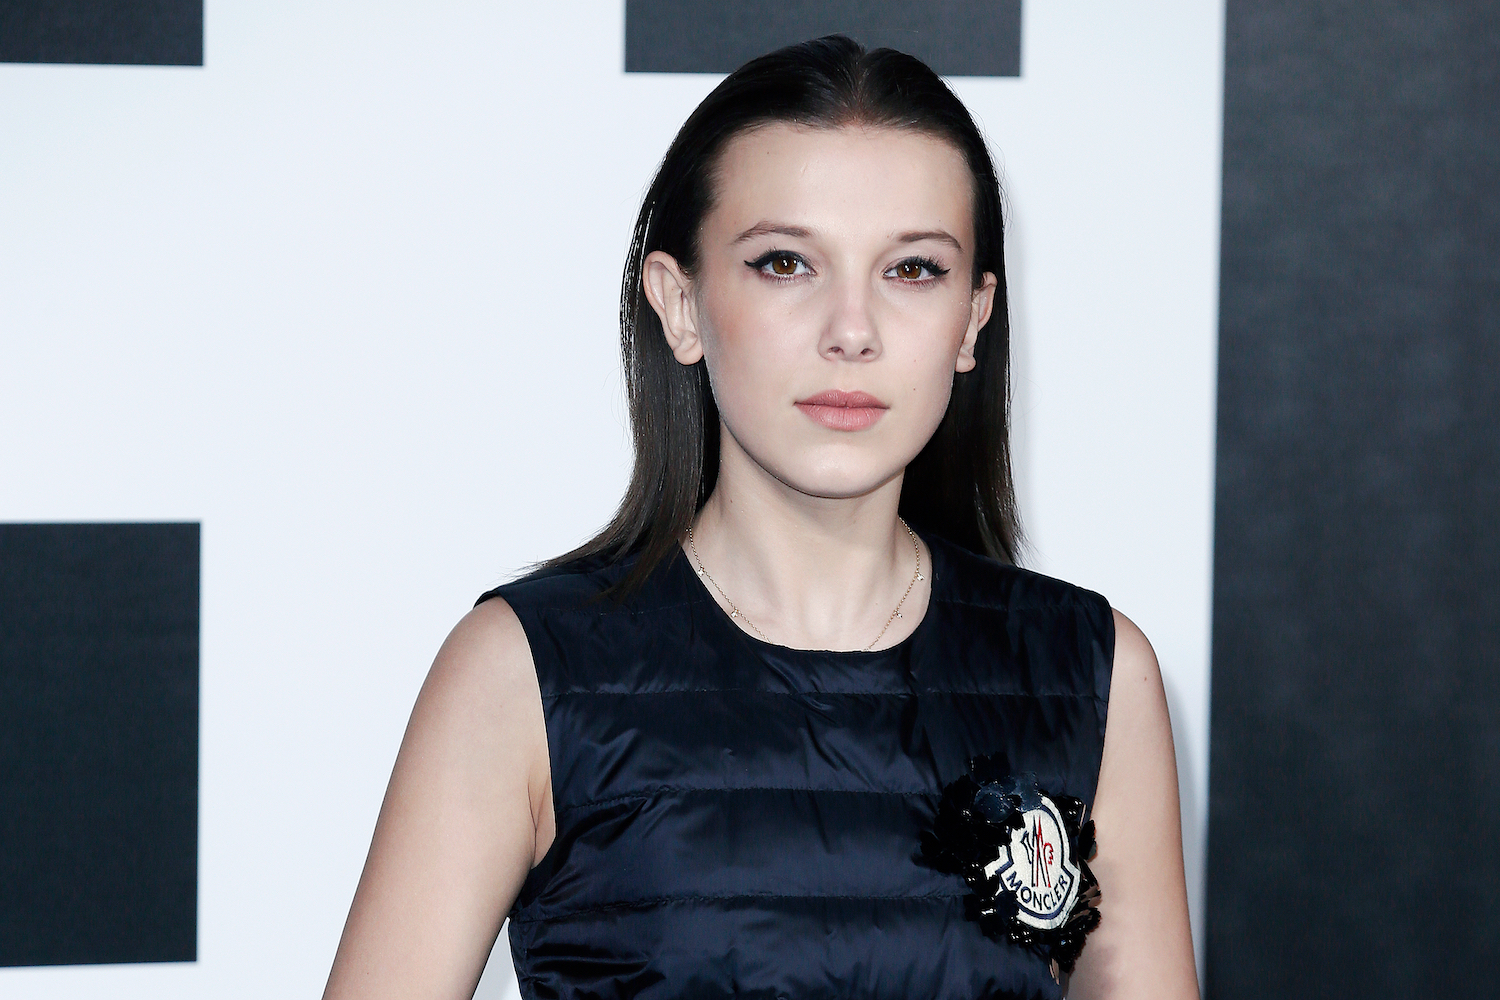 Millie Bobby Brown's latest jaw-dropping photos set the internet ablaze